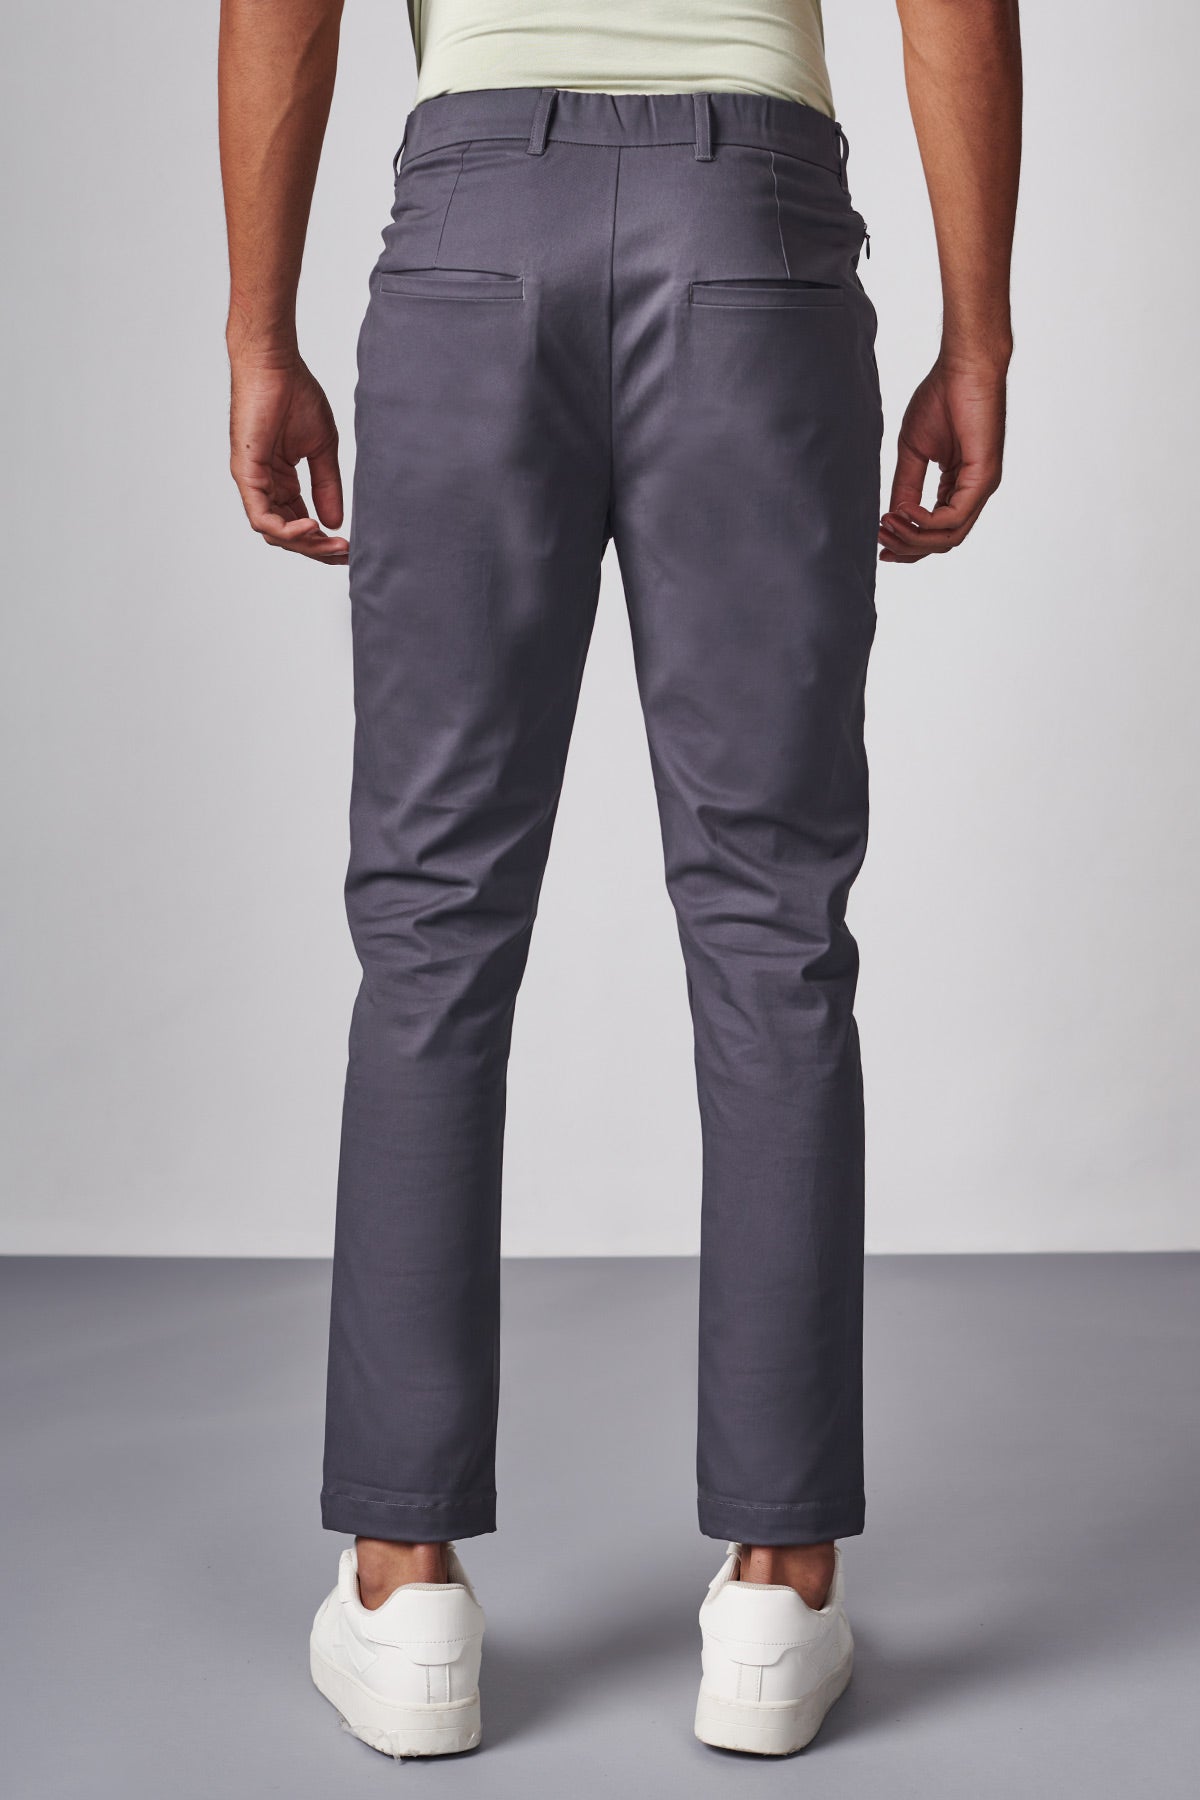 The 24 Marble Grey 4 Way Trouser